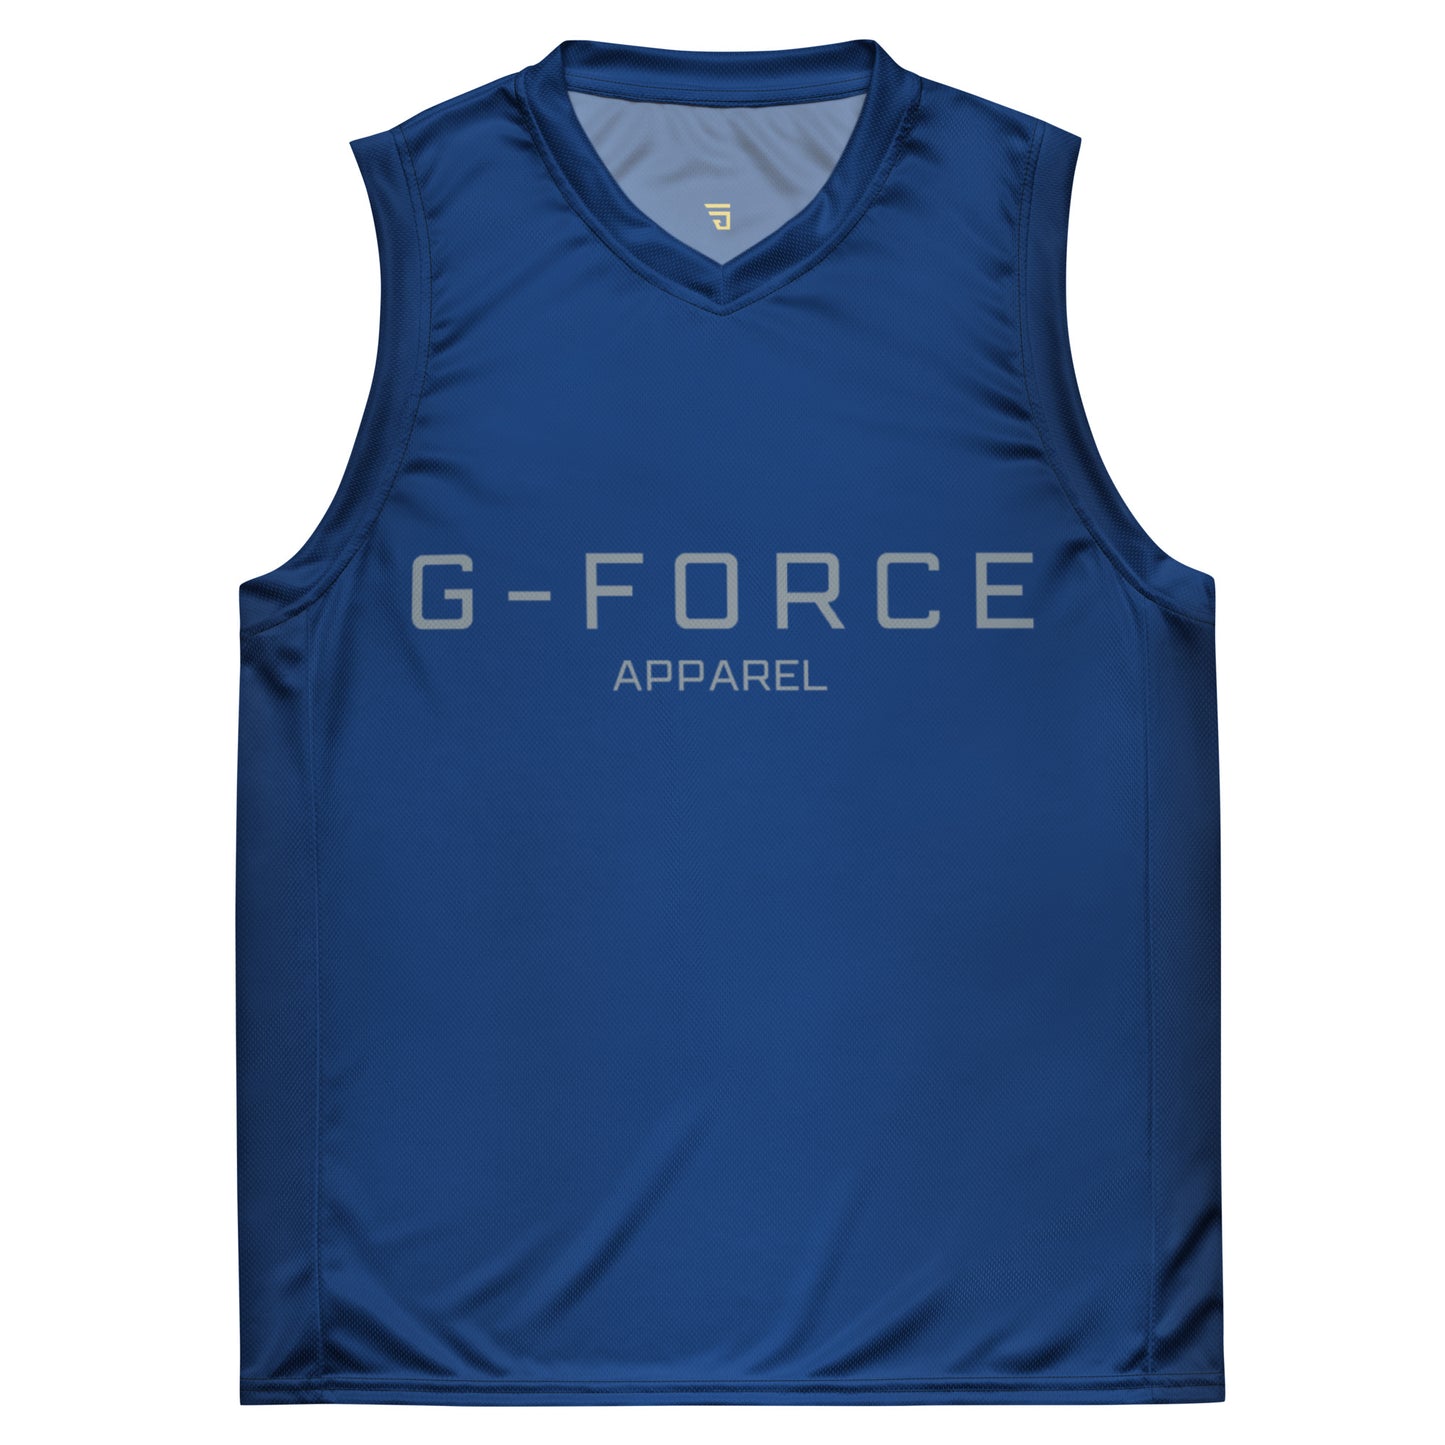 G-FORCE APPAREL Fitness jersey